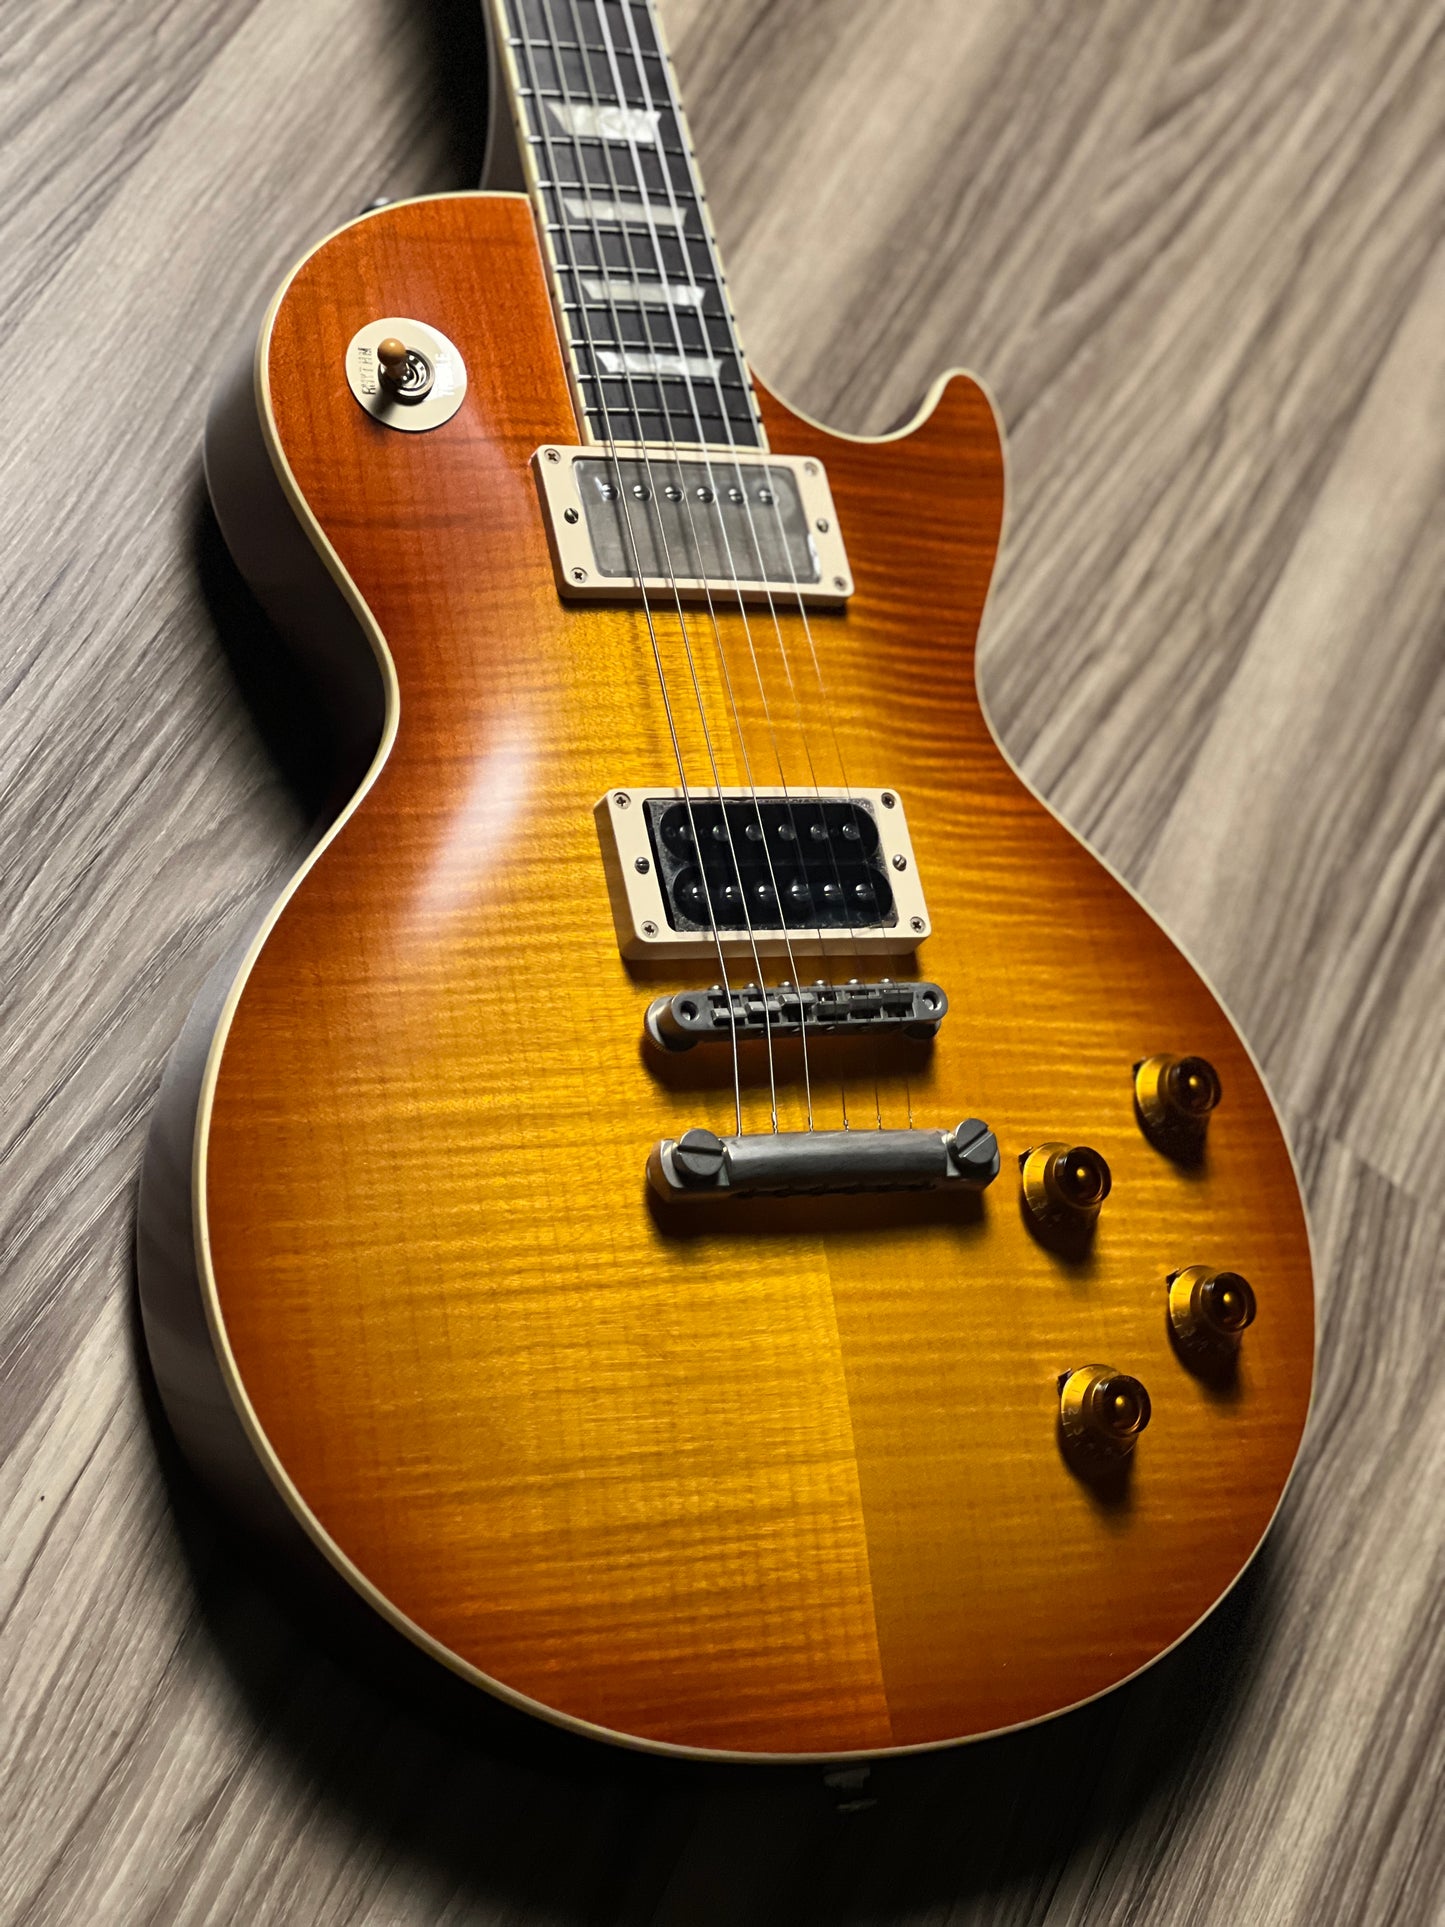 Tokai Love Rock LS150F-3A-RELIC SG/VF Premium Series Japan 3A Solid Flame Top in Violin Finish S/N 2449305